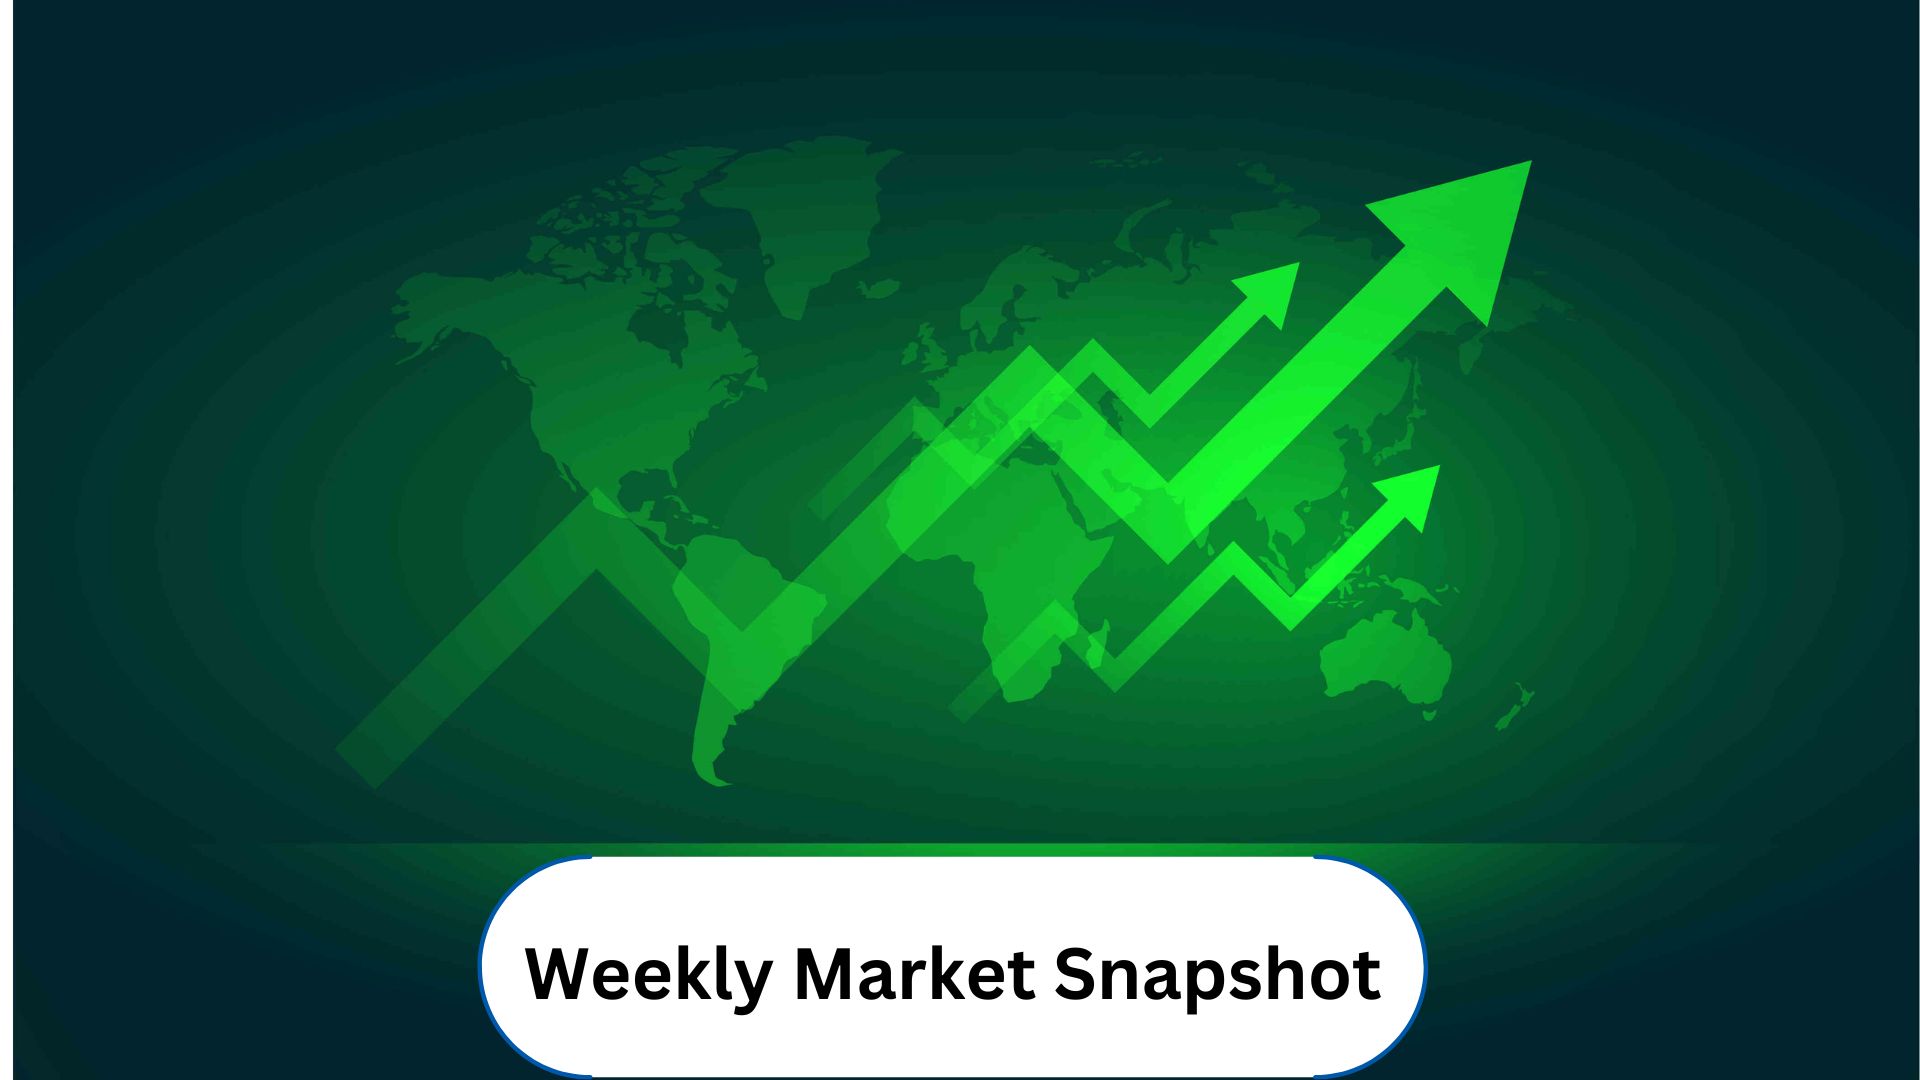 Weekly Markets Snapshot: Mixed Bag with Some Modest Gains